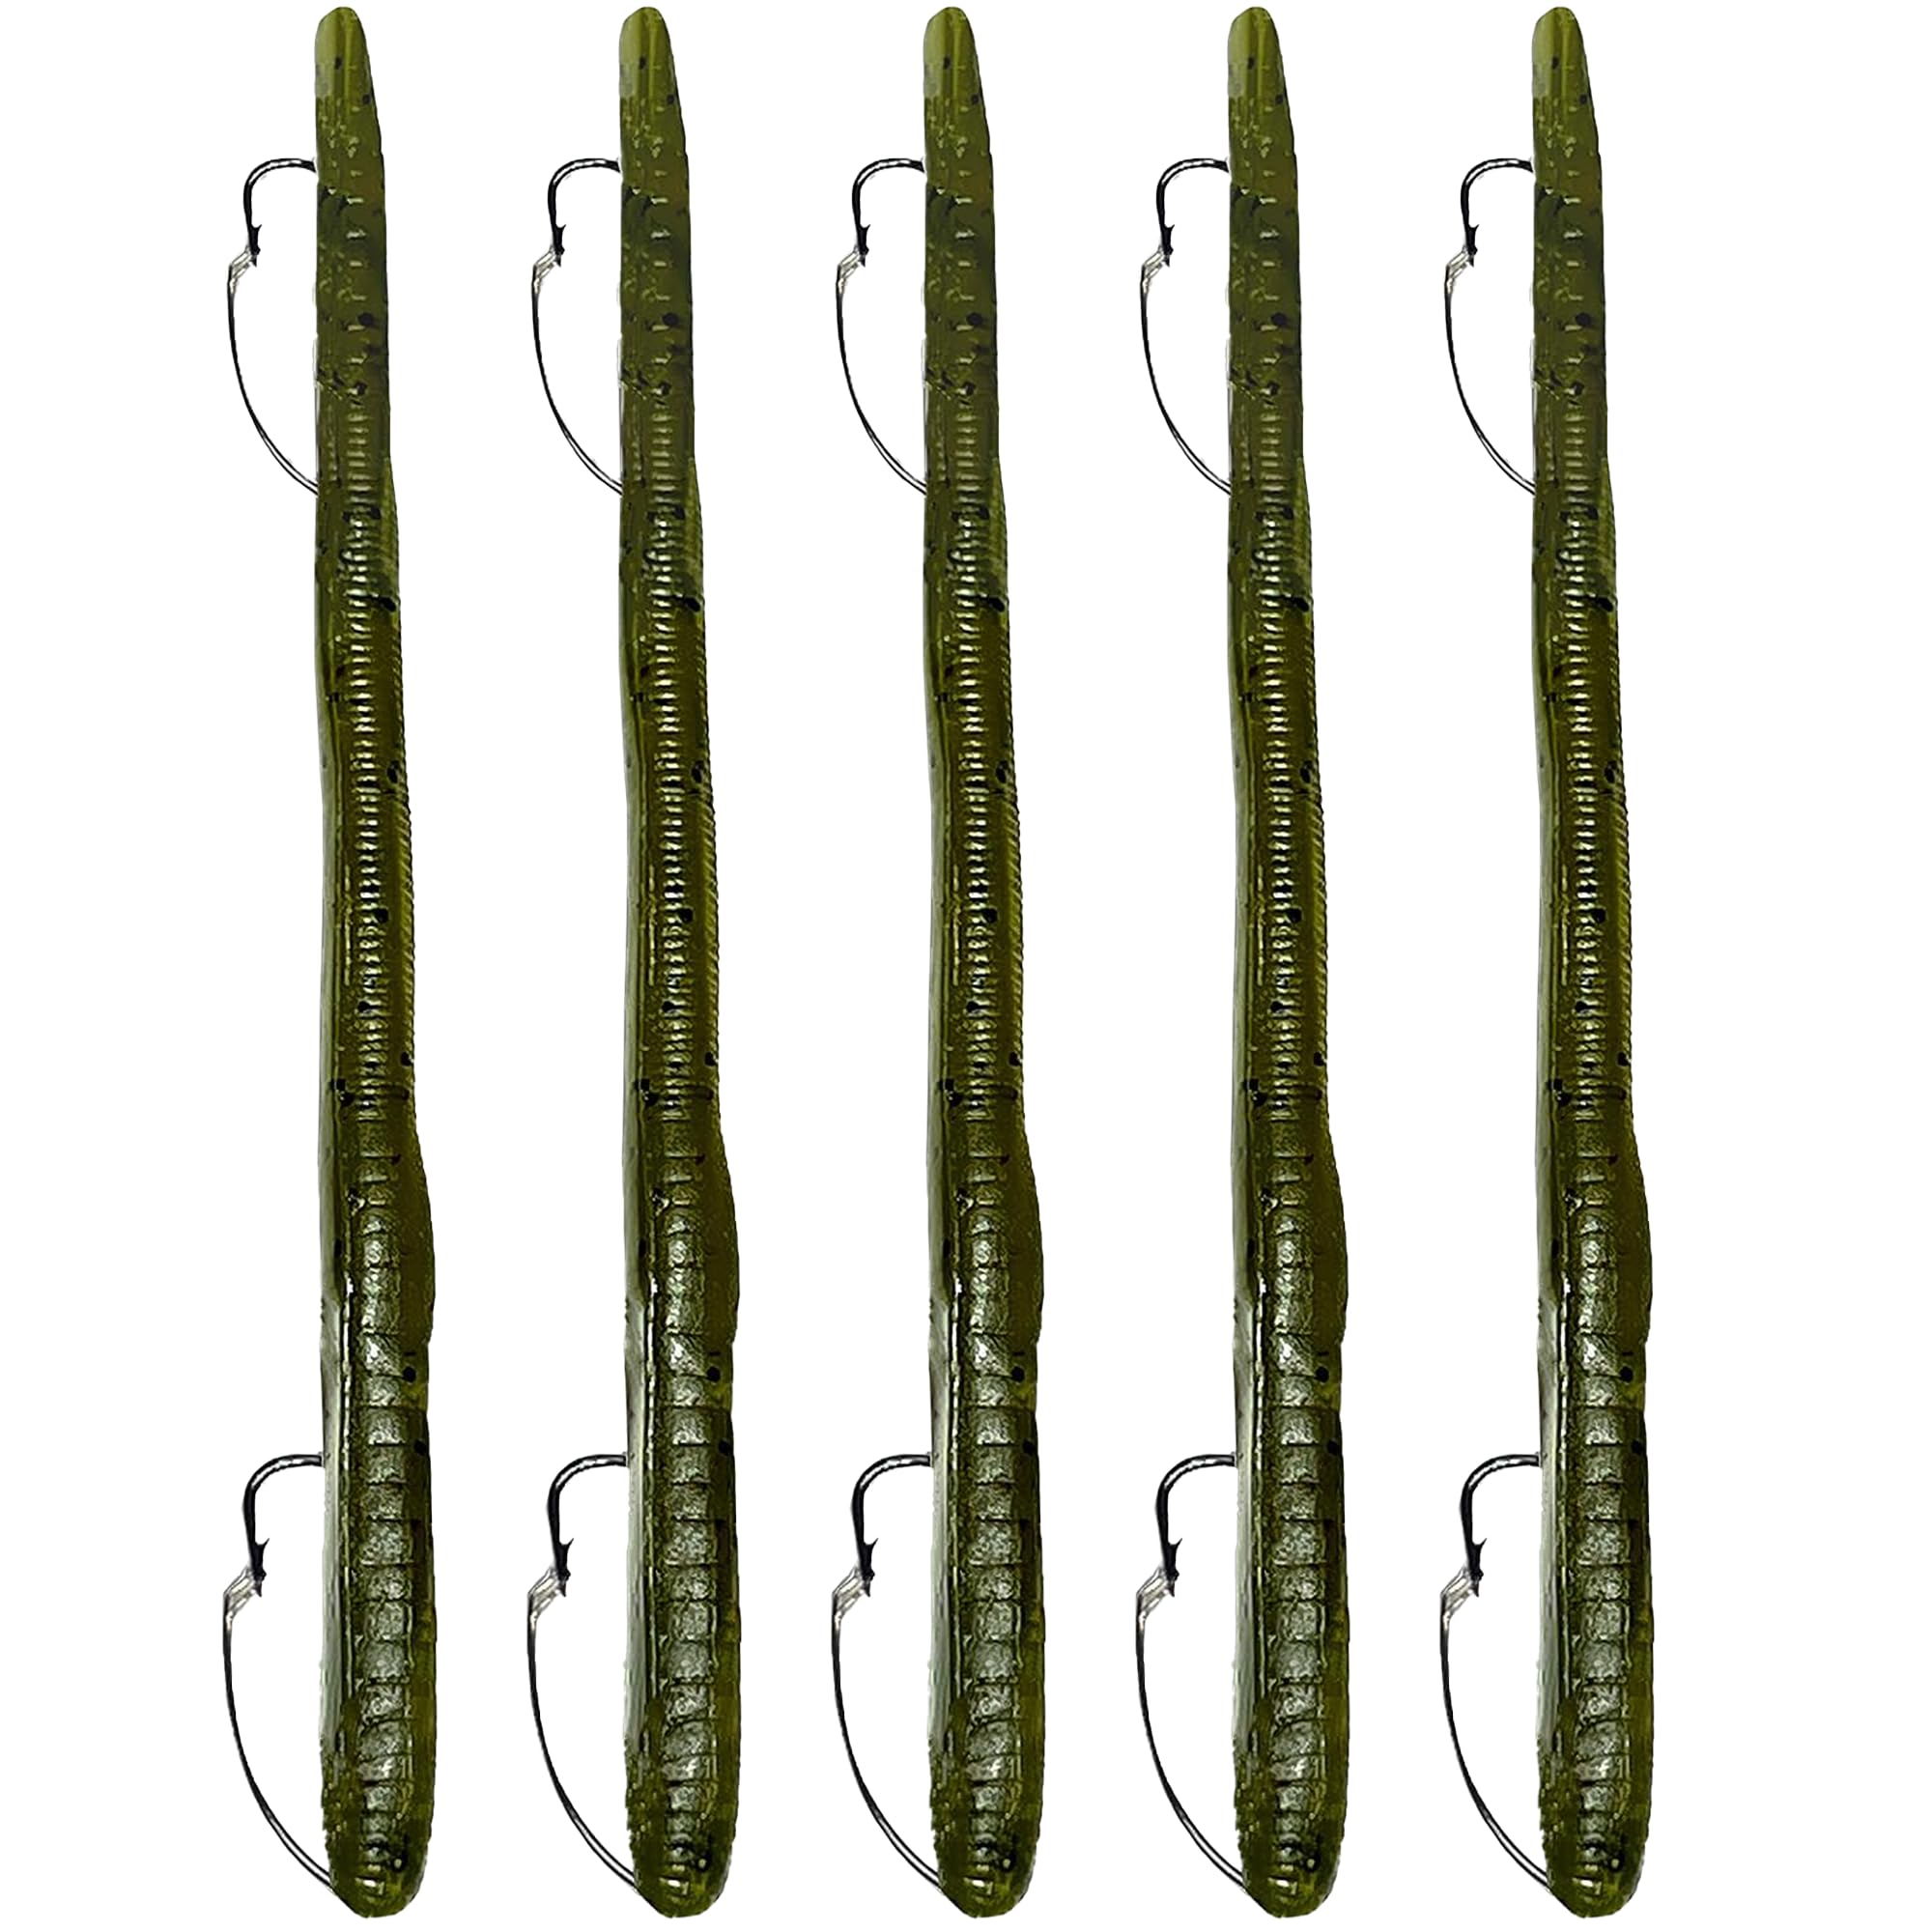 Delong Lures Weedless Pre-Rigged Fishing Lures Bass Set, Pike, and Anything in Between - Made in USA - Extra Durable Soft Plastic Swimbaits for Bass